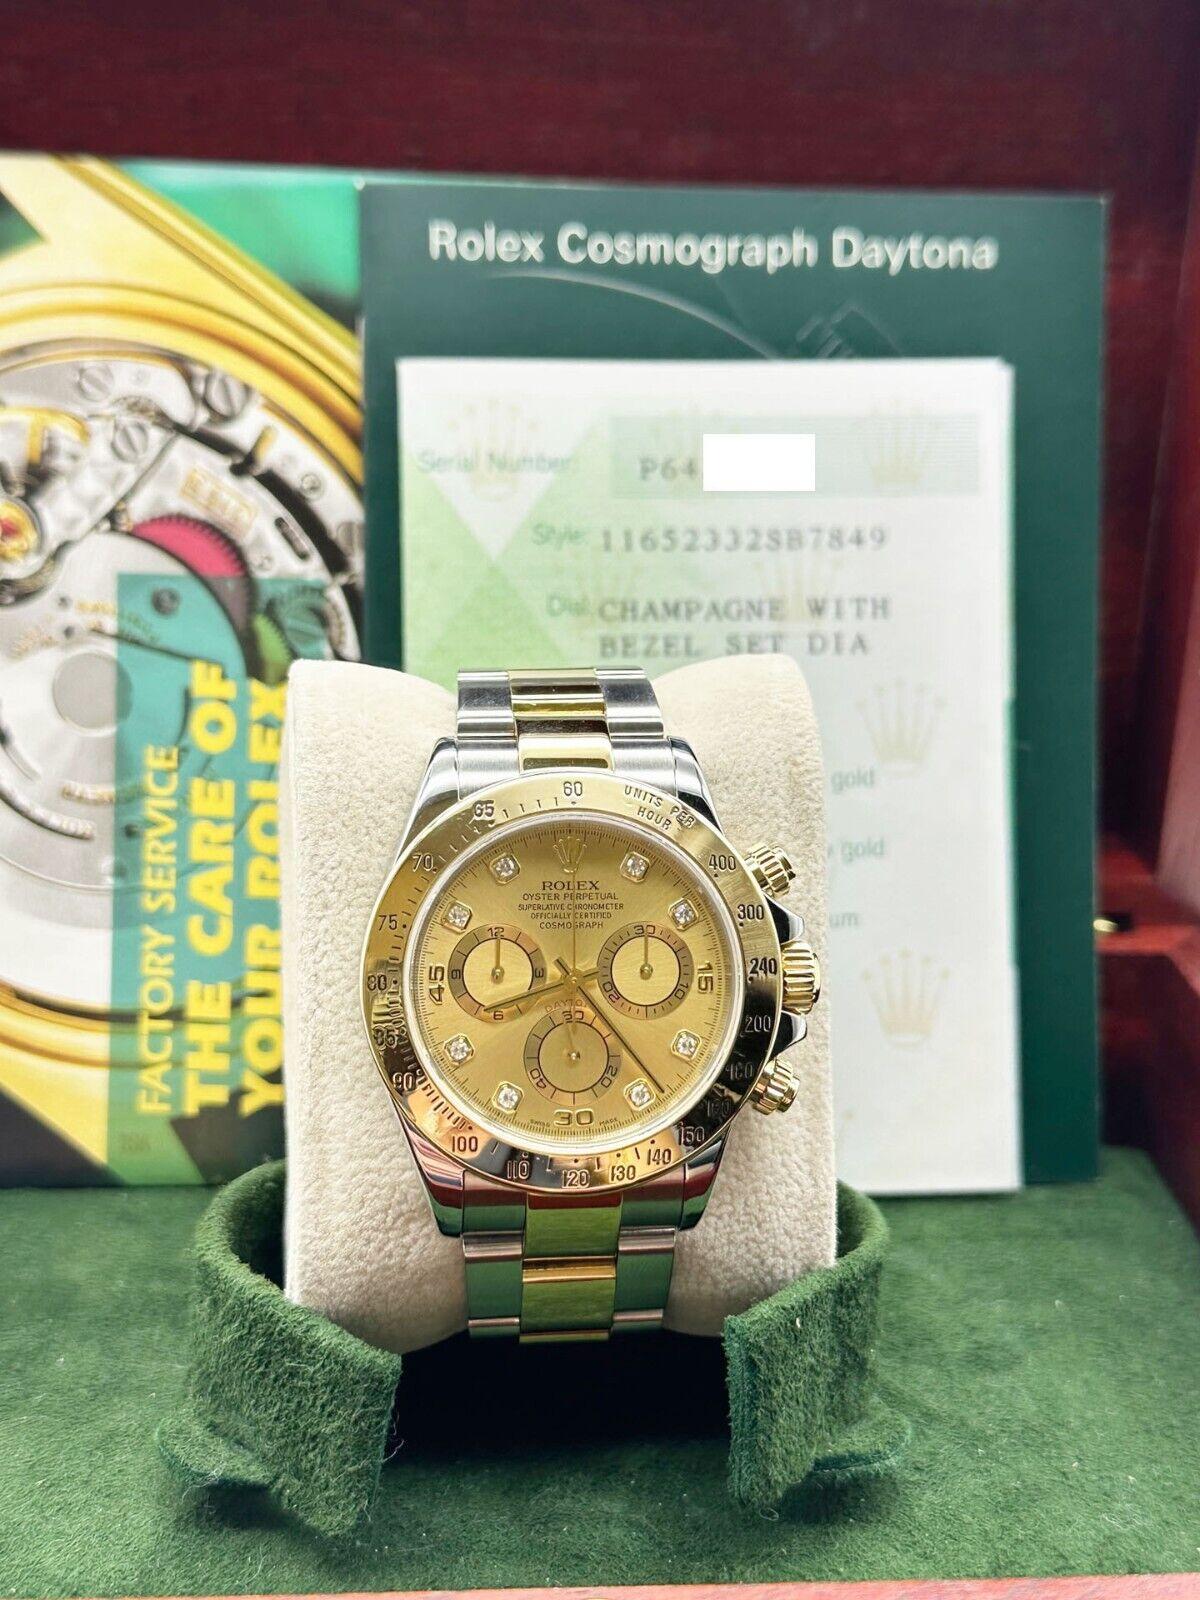 Style Number: 116523 

Serial: P643***

Year: 2003

Model: Daytona

Case Material: Stainless Steel 

Band: 18K Yellow Gold & Stainless Steel  

Bezel: 18K Yellow Gold 

Dial: Original Champagne Diamond Dial 

Face: Sapphire Crystal 

Case Size: 40mm